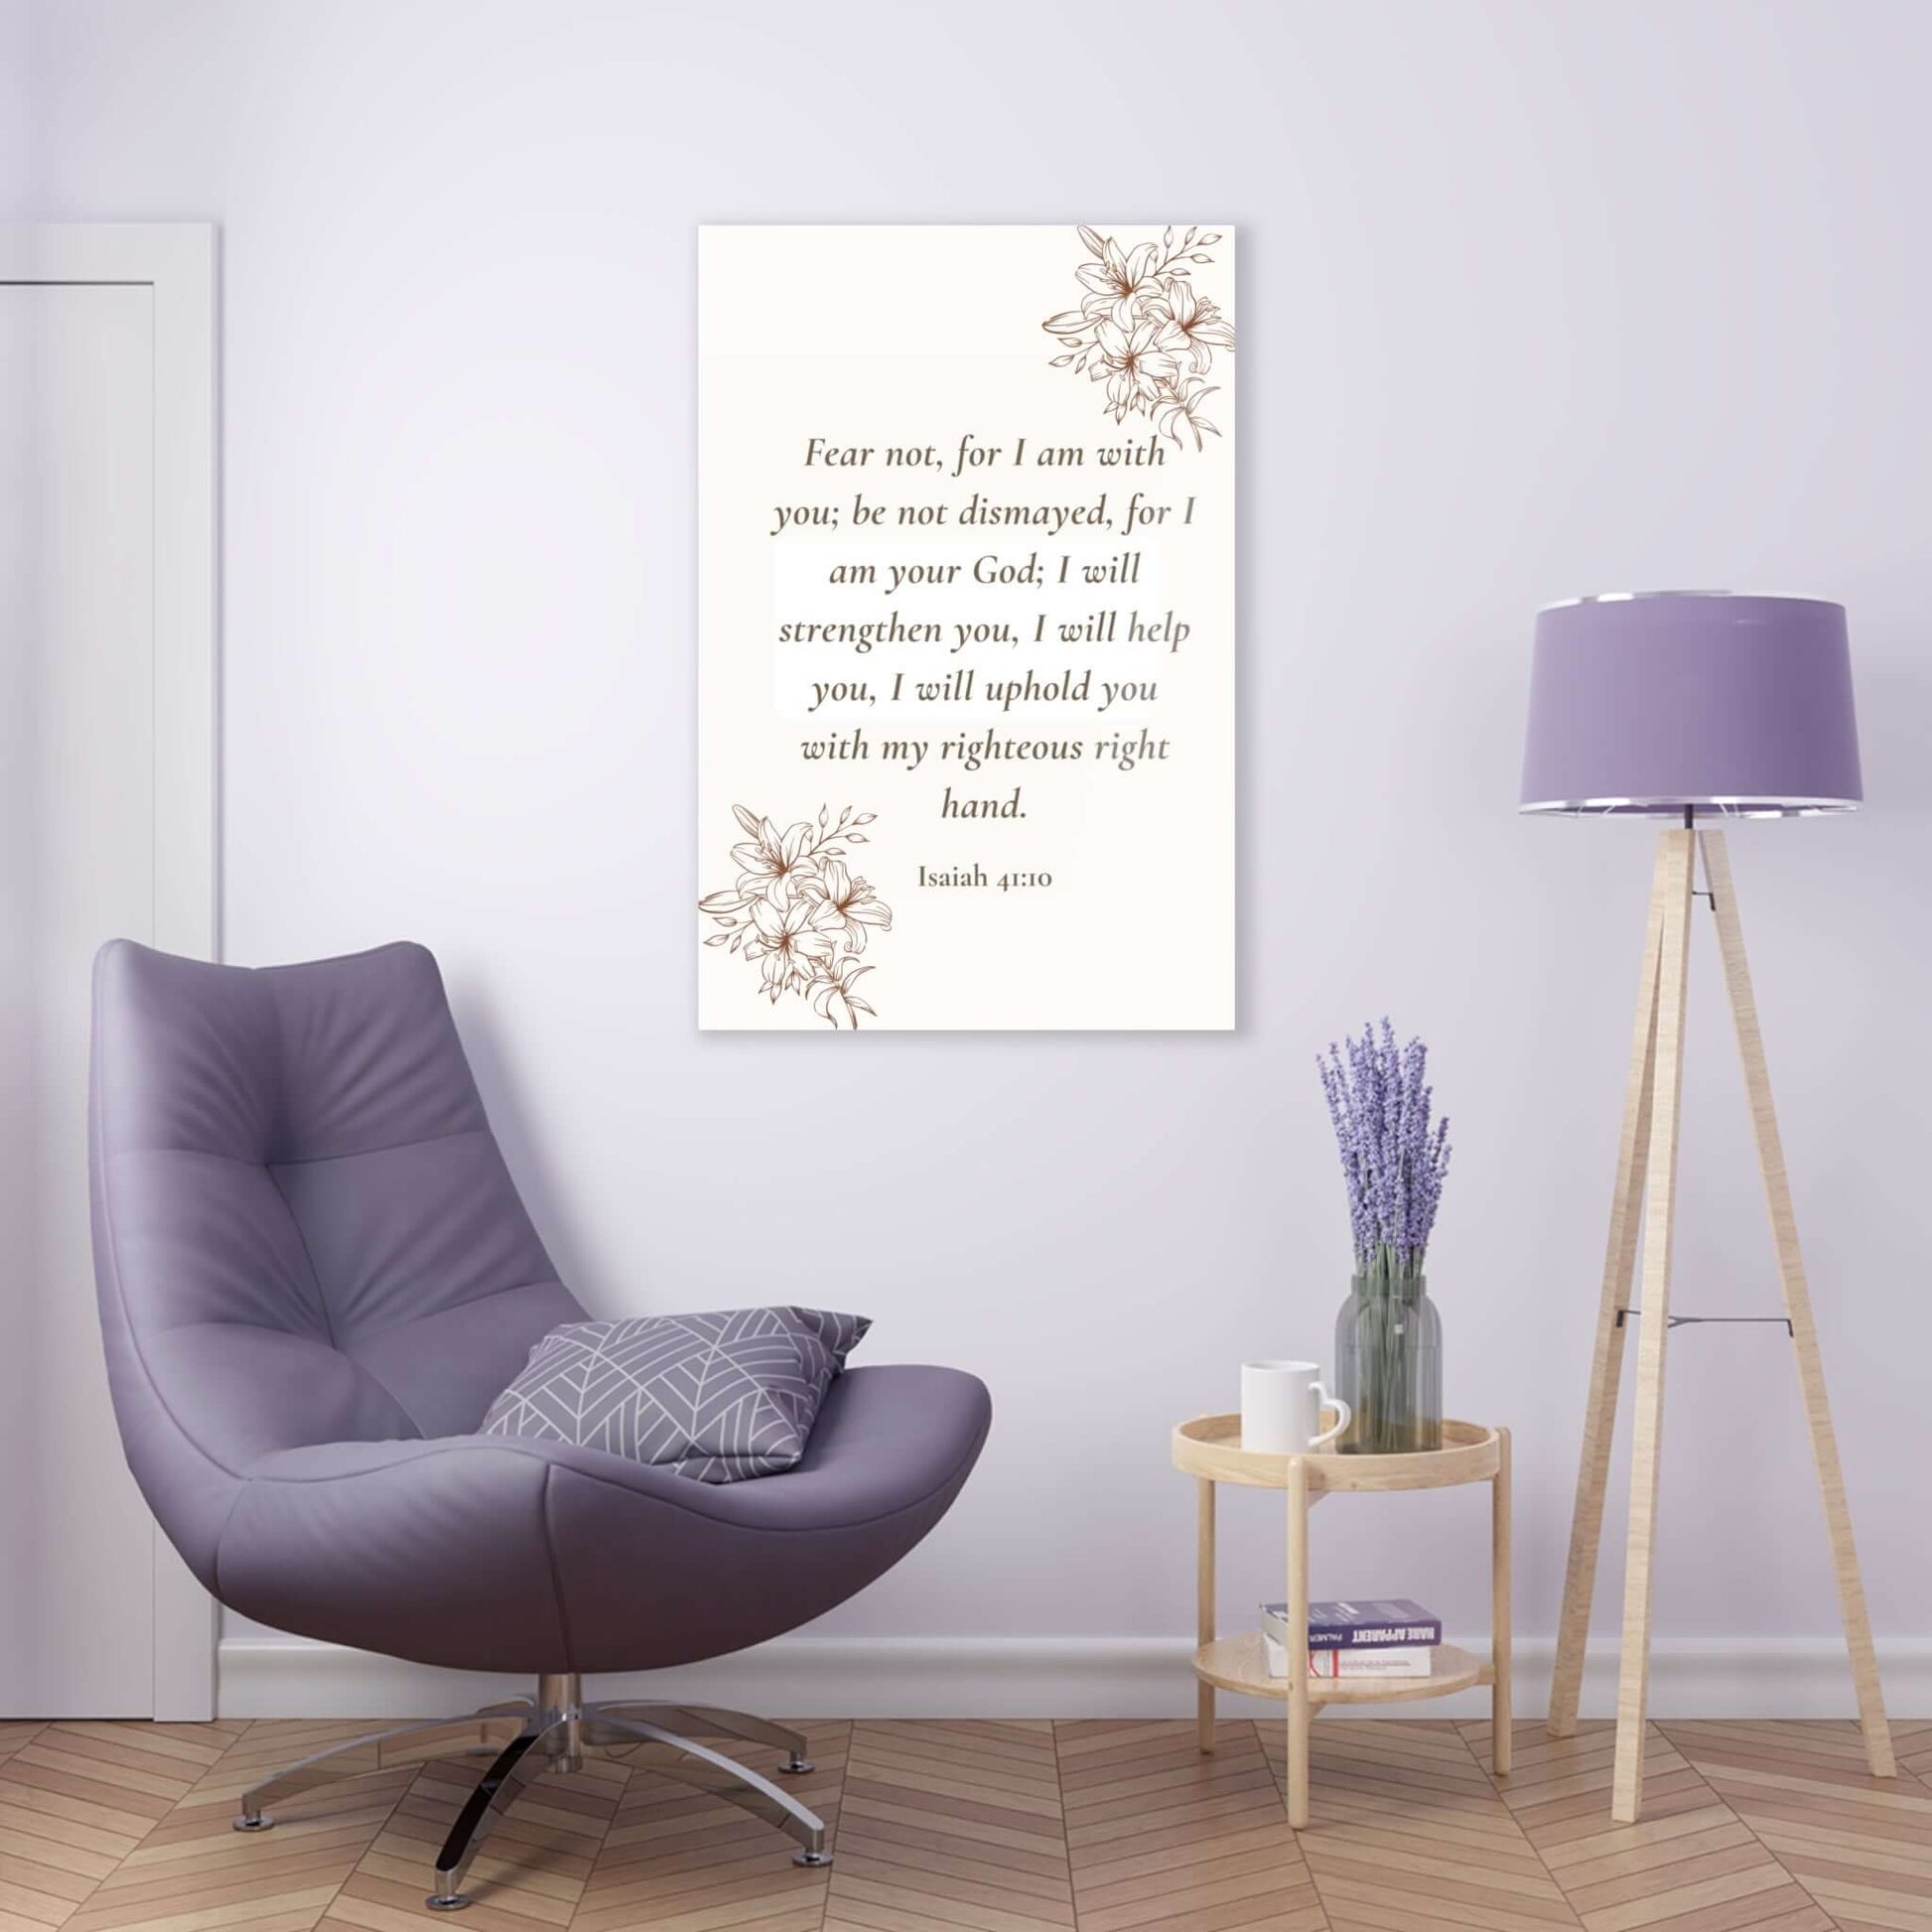 Minimalist Wall Decor: Acrylic Print with Uplifting Scripture | Art & Wall Decor,Assembled in the USA,Assembled in USA,Decor,Home & Living,Home Decor,Indoor,Made in the USA,Made in USA,Poster